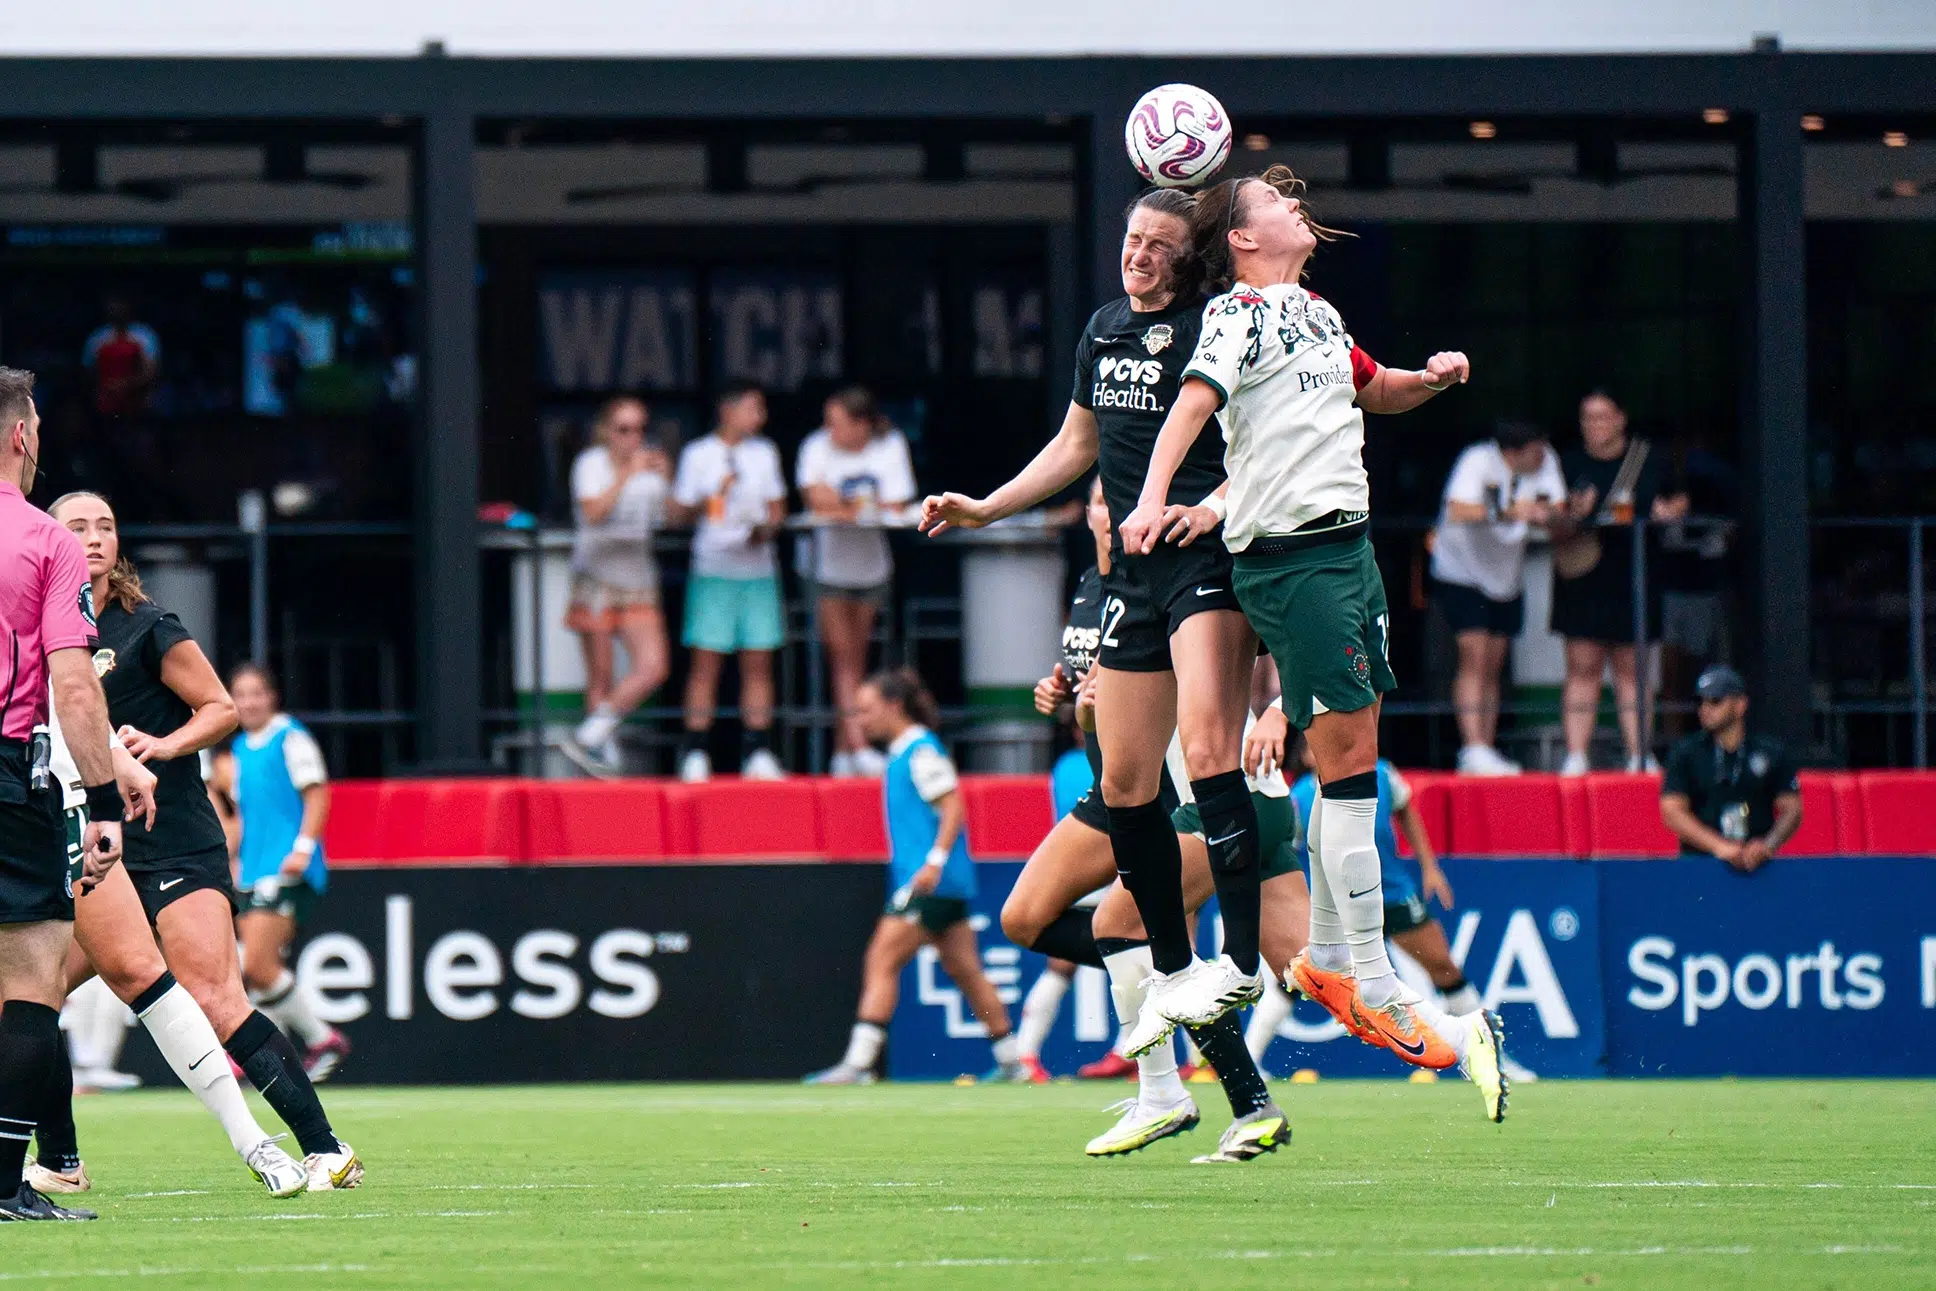 Andi Sullivan in a black uniform jumps up to head the ball as Christine Sinclair in a white top and green shorts tries to challenge her.